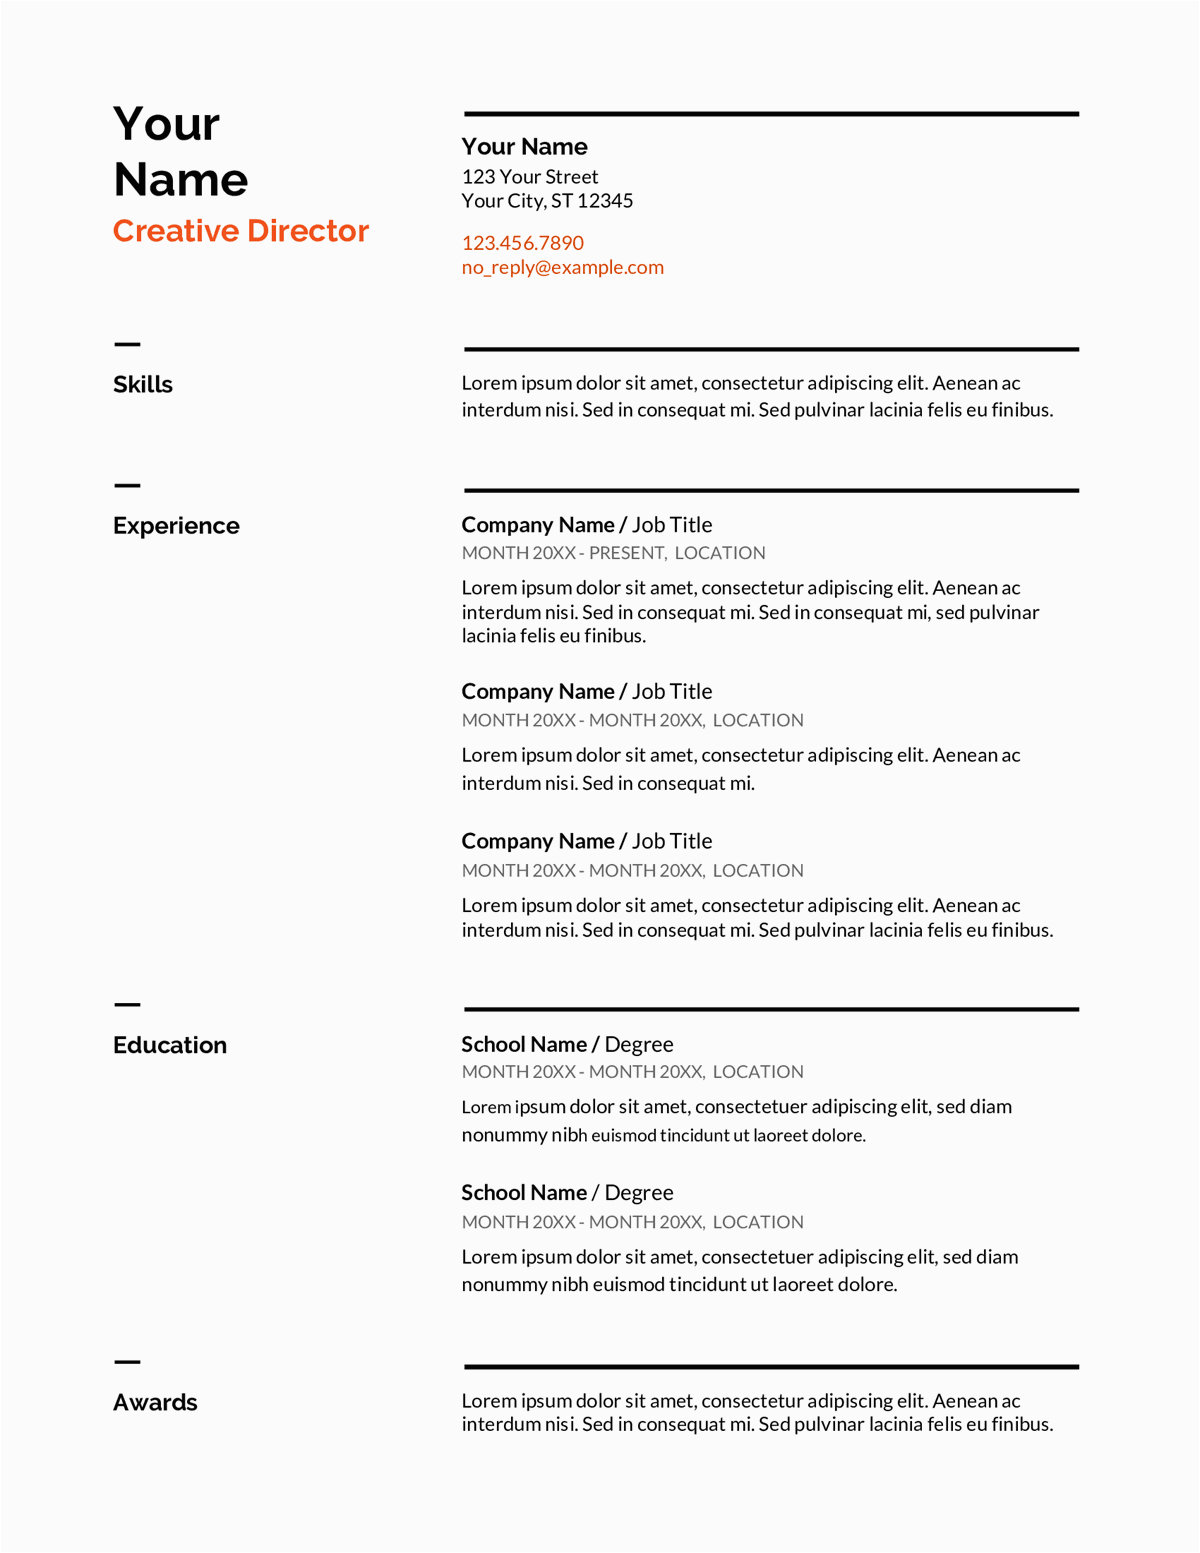 Sample Resume for A New Career Cv format Resume for Freshers Looking for the First Job News Word